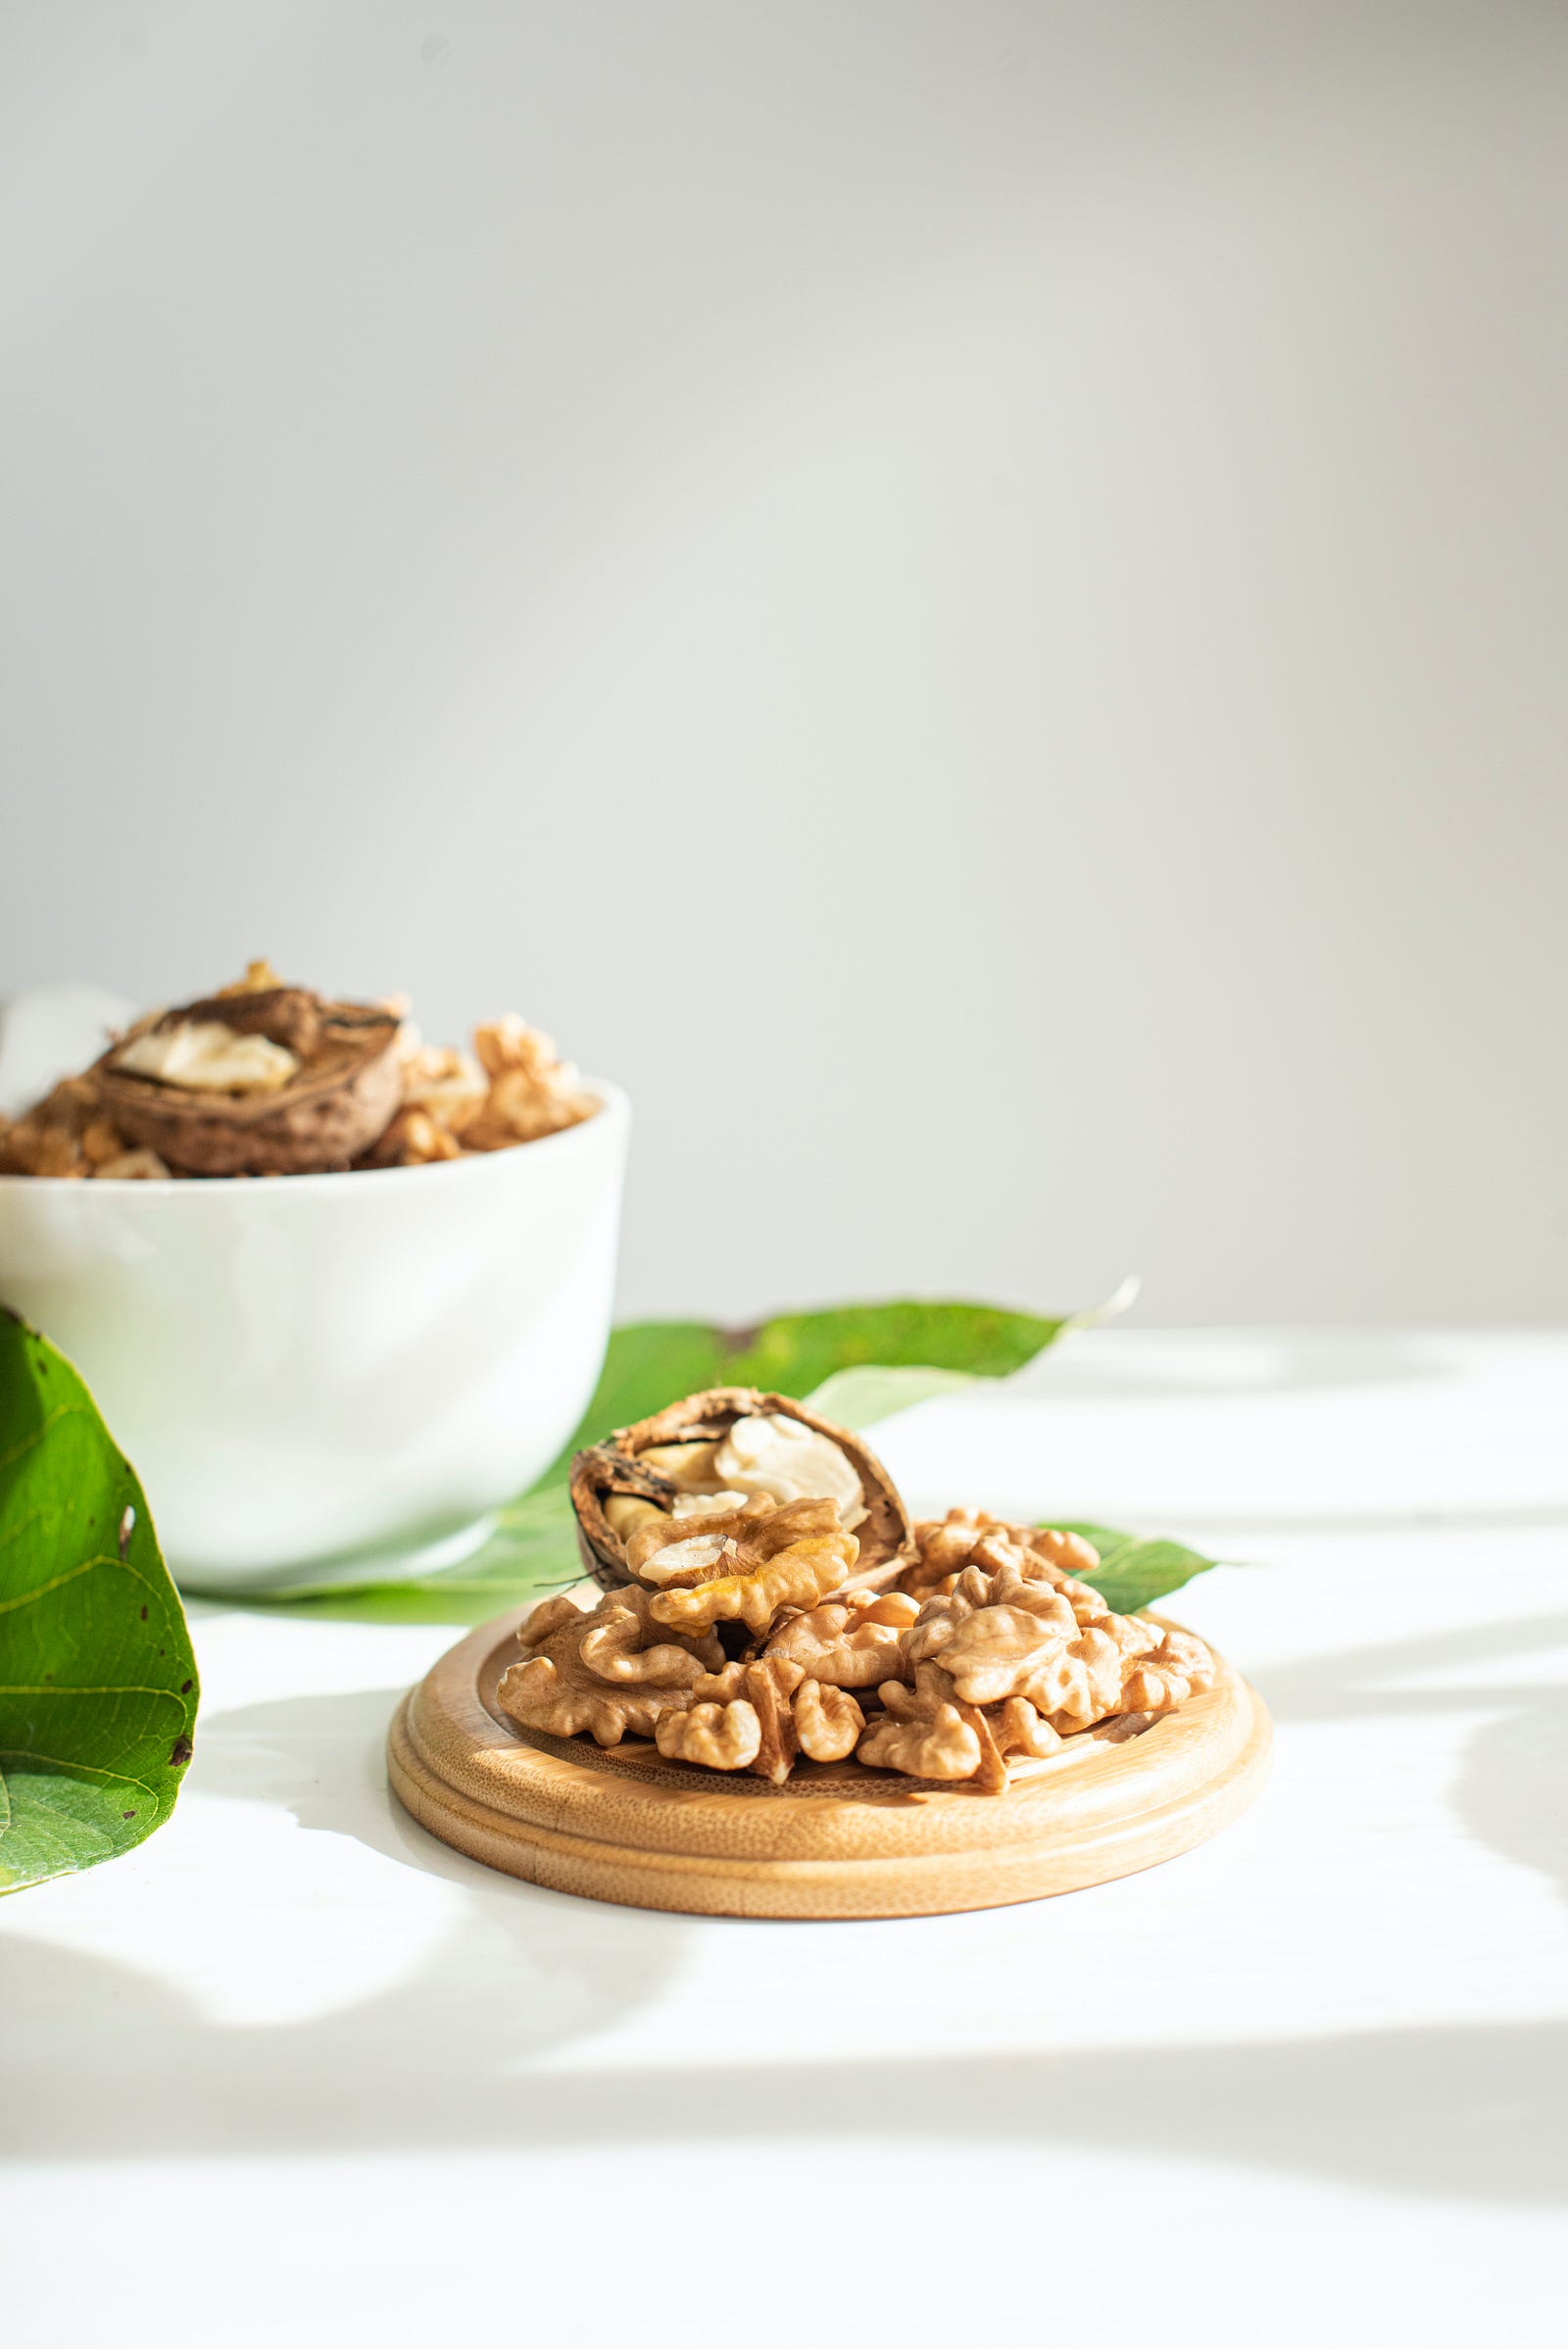 Walnuts. A few simple modifications in my diet can improve my cholesterol and cardiovascular fitness.